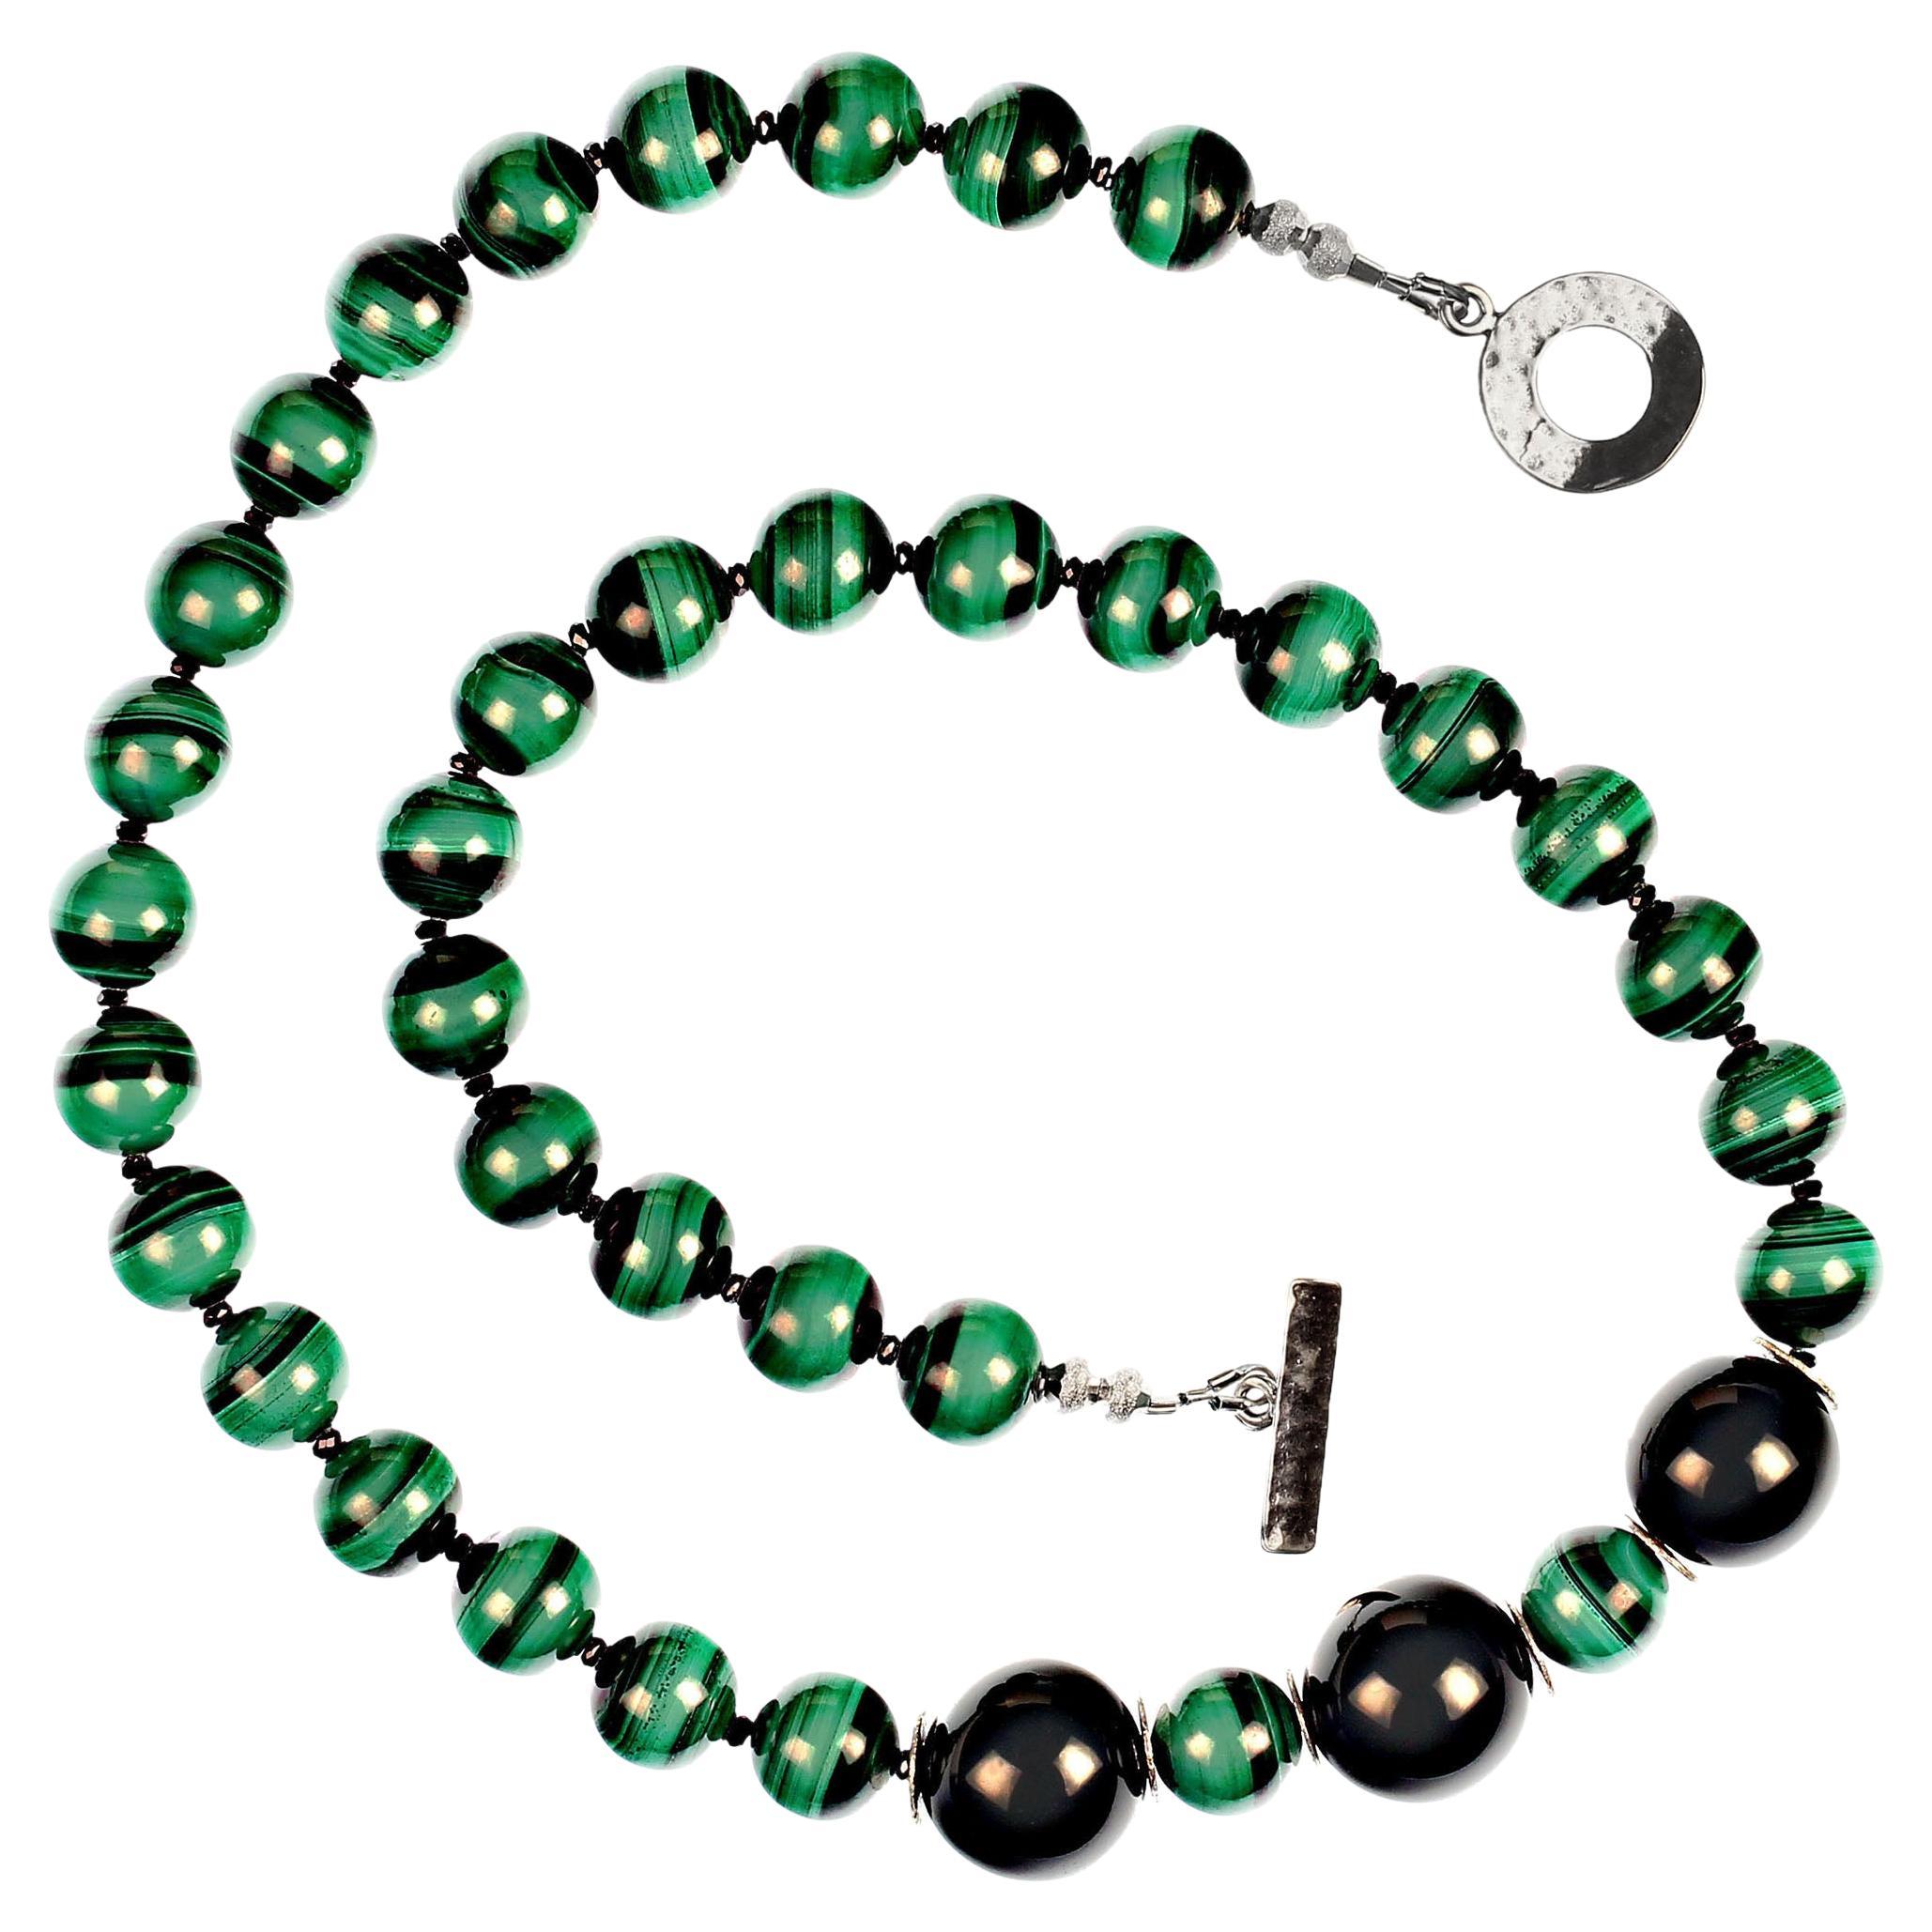 Women's or Men's AJD Magnificent Malachite 20 inch necklace with Spinel and Onyx  Great Gift! For Sale